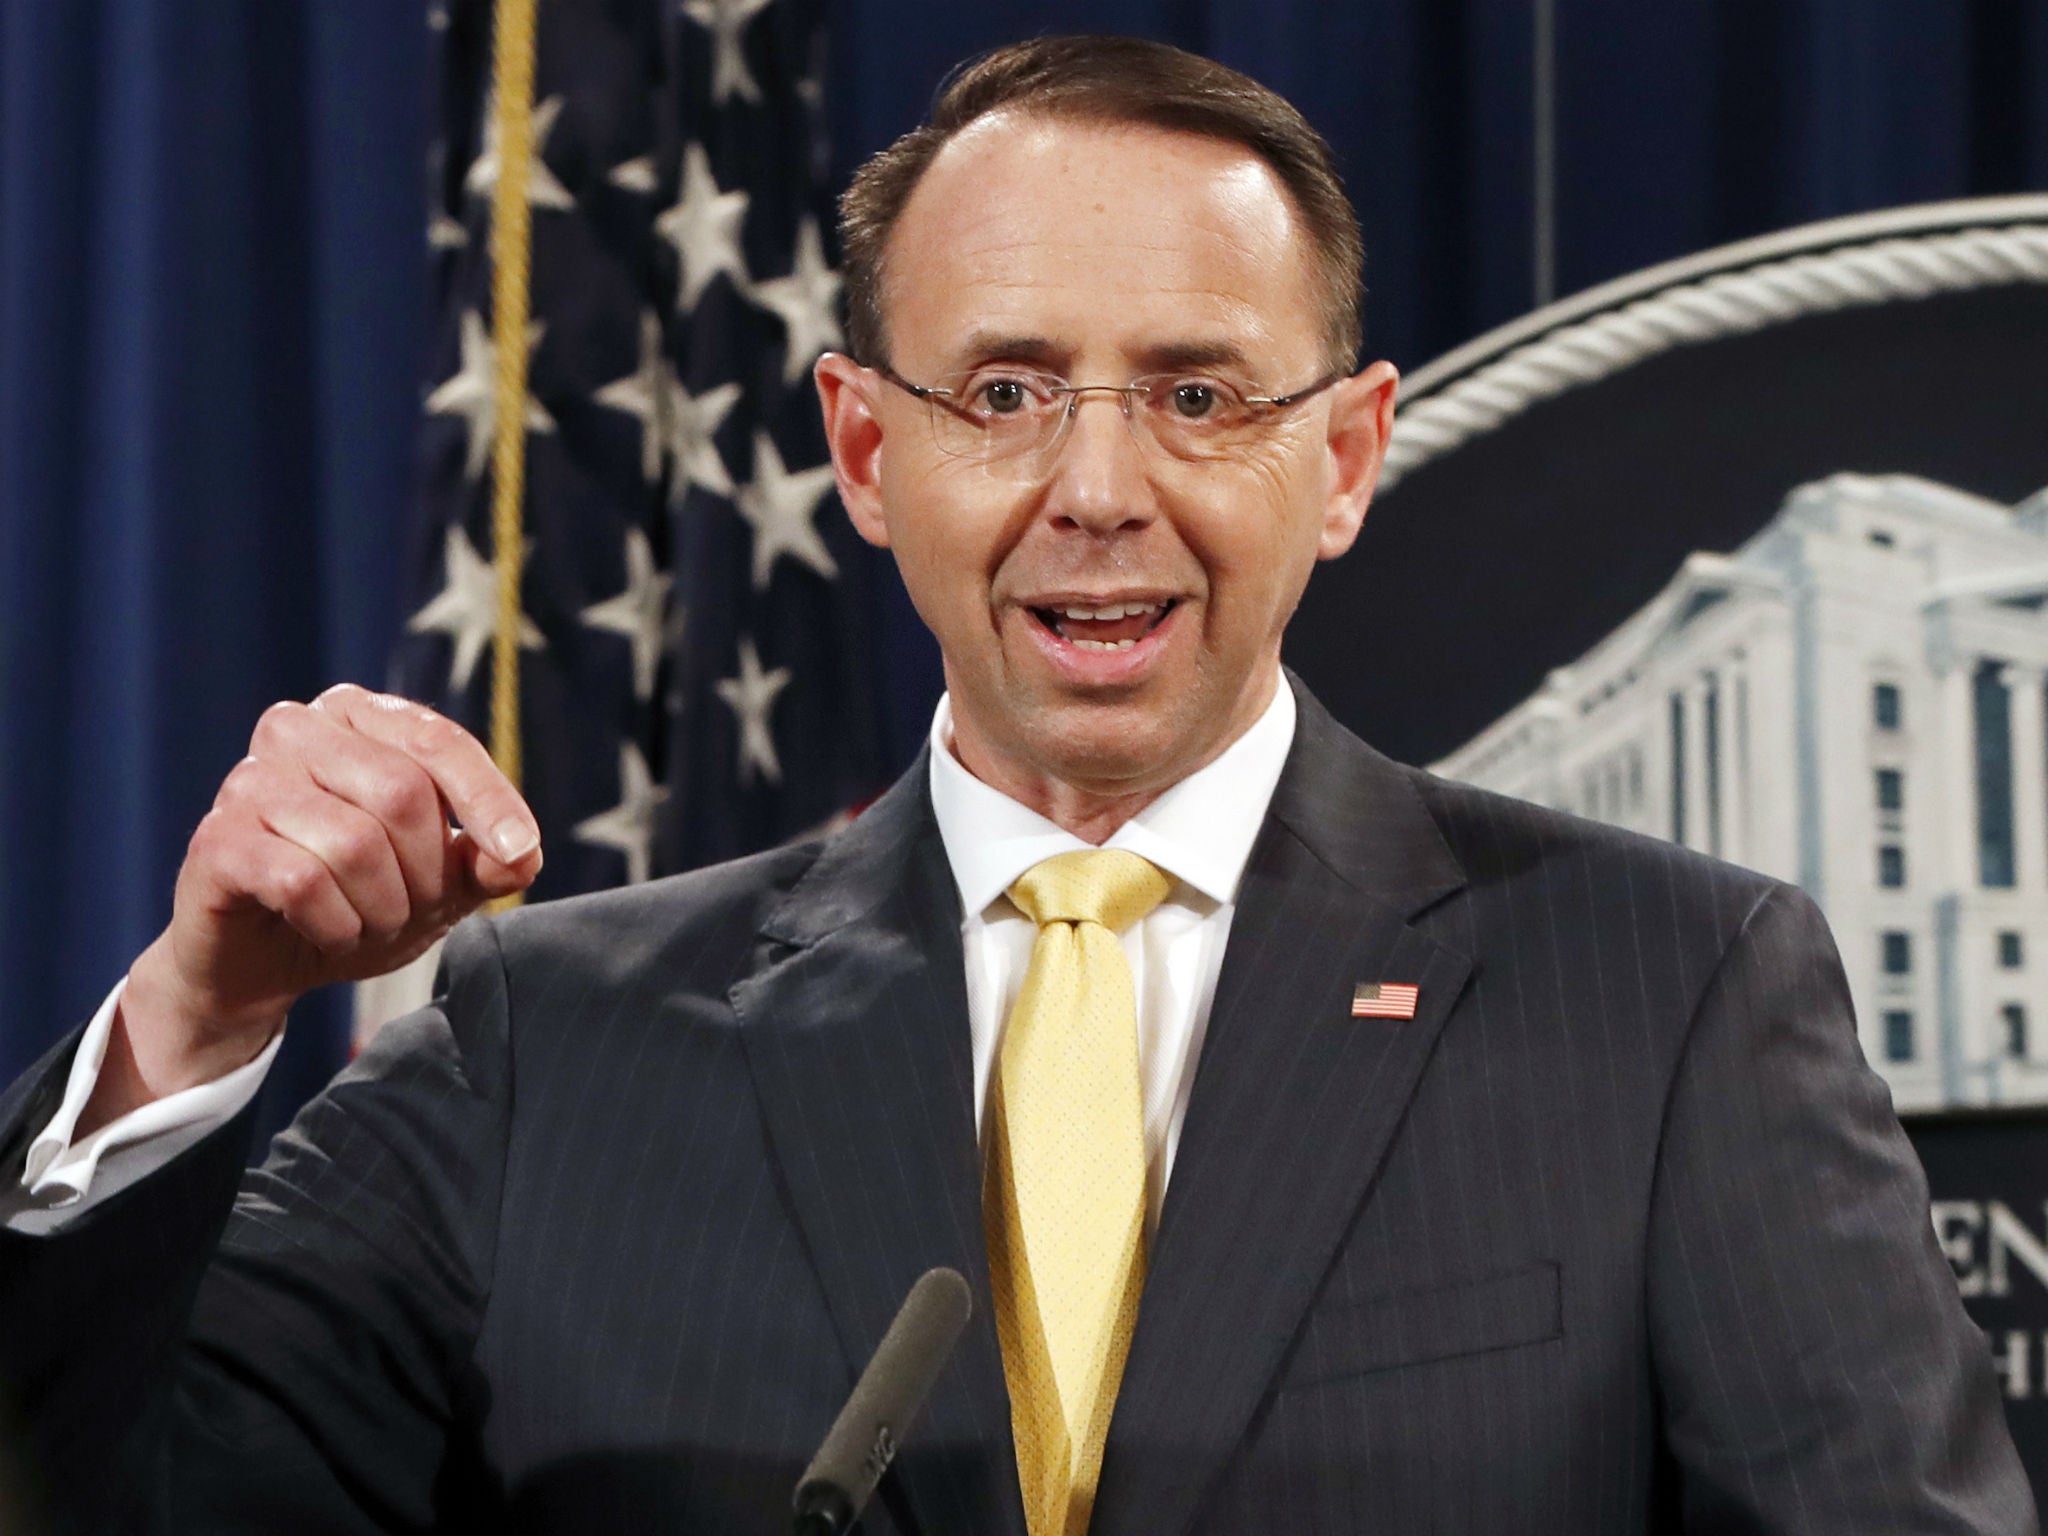 Mr Rosenstein appointed the special counsel to investigate Russia's meddling in the 2016 election